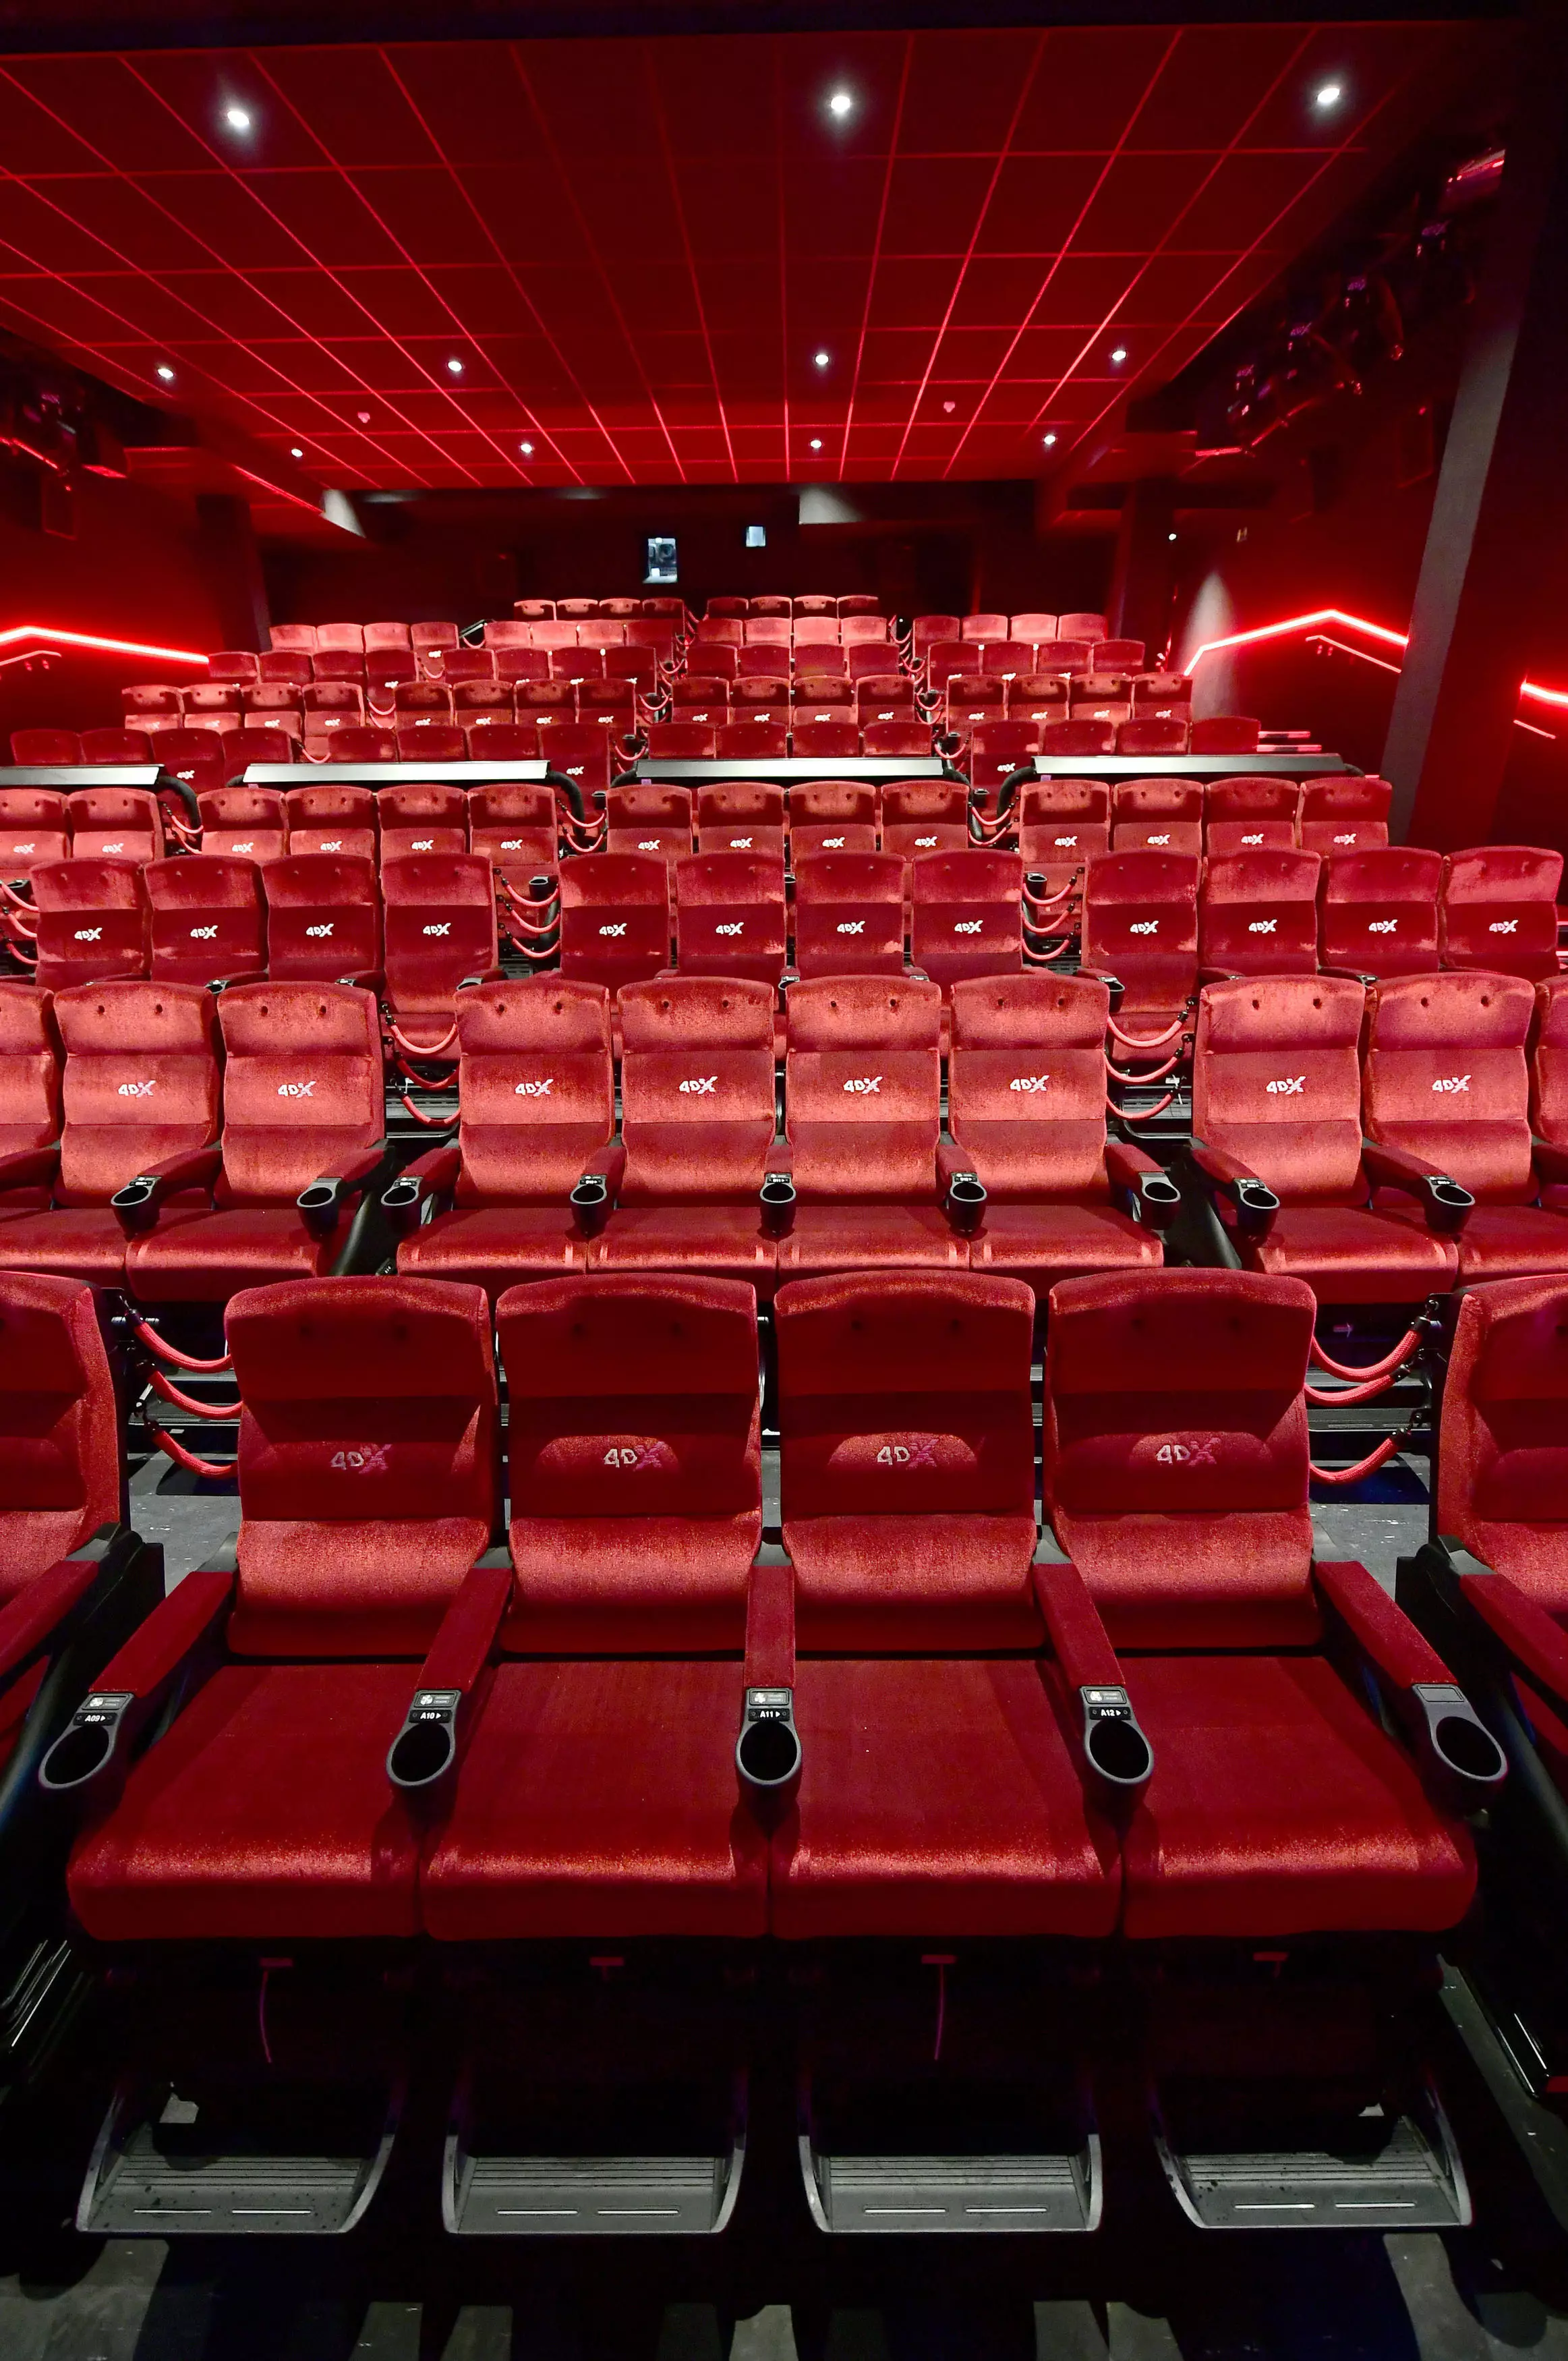 When Cineworld reopens it's expected there will be social distancing in place (